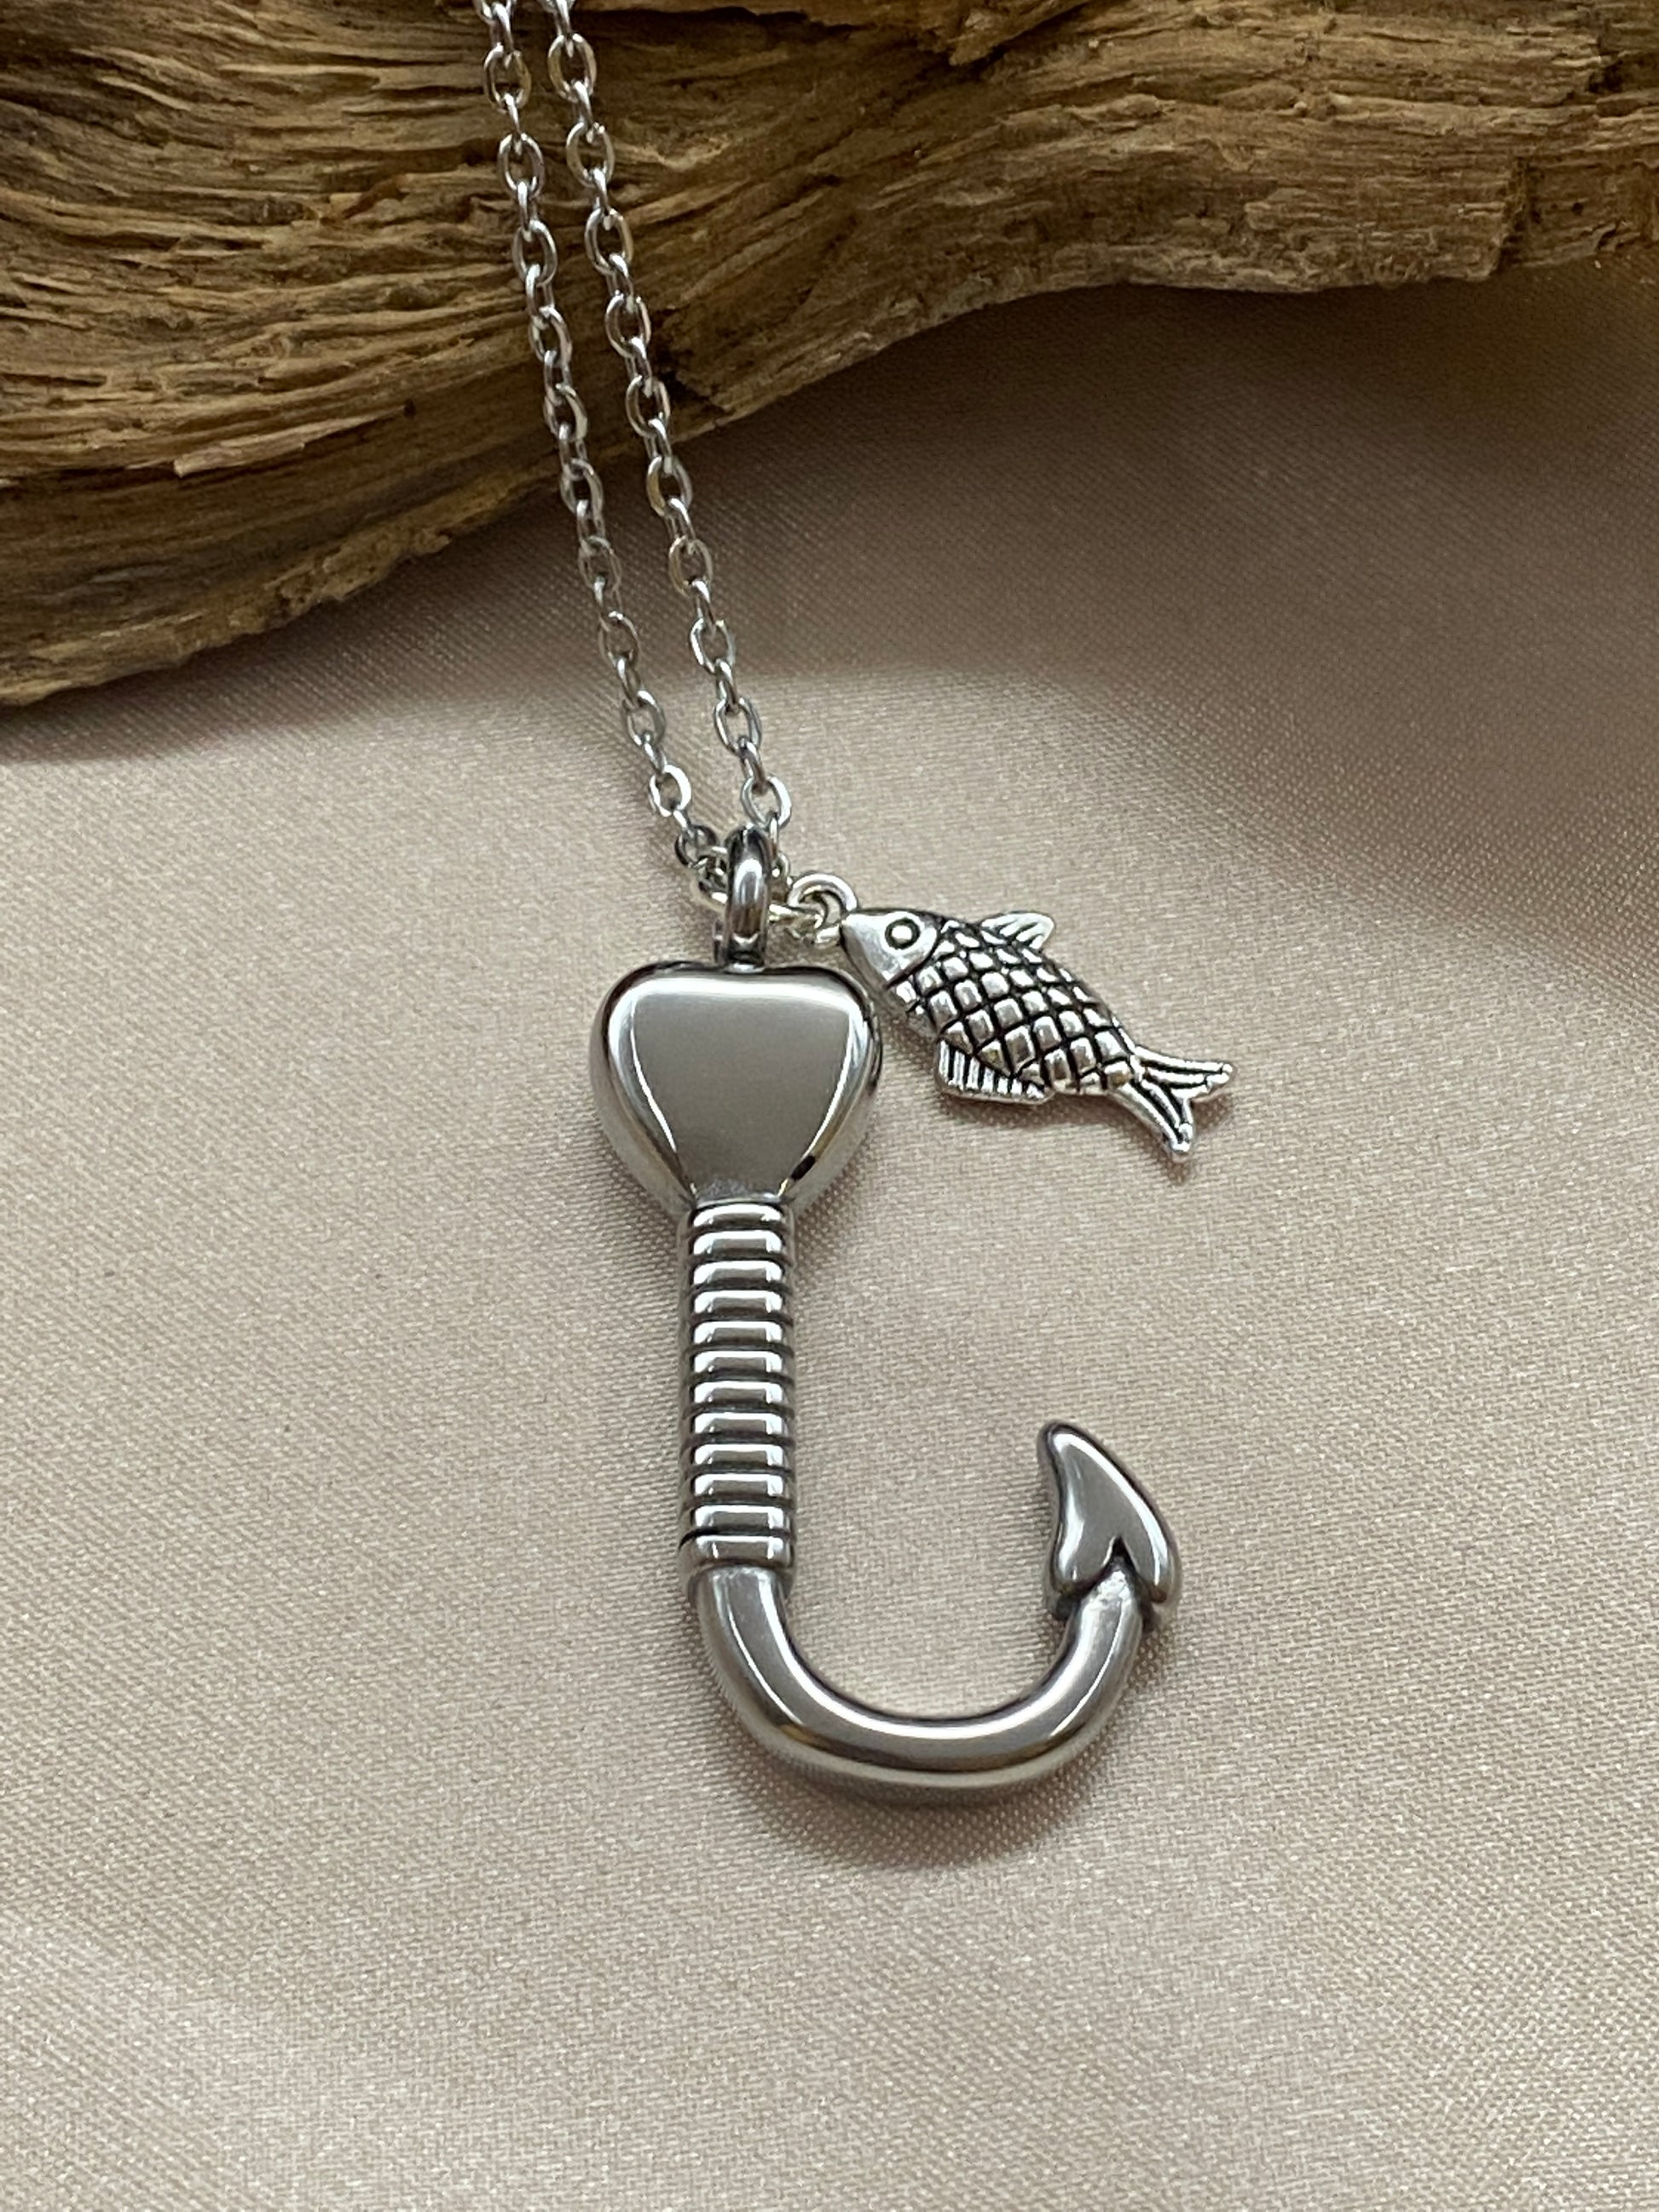 Fish Hook Urn Necklace with Silver Fish Charm - Cremation Pendant, Fis –  Eternal Keepsake